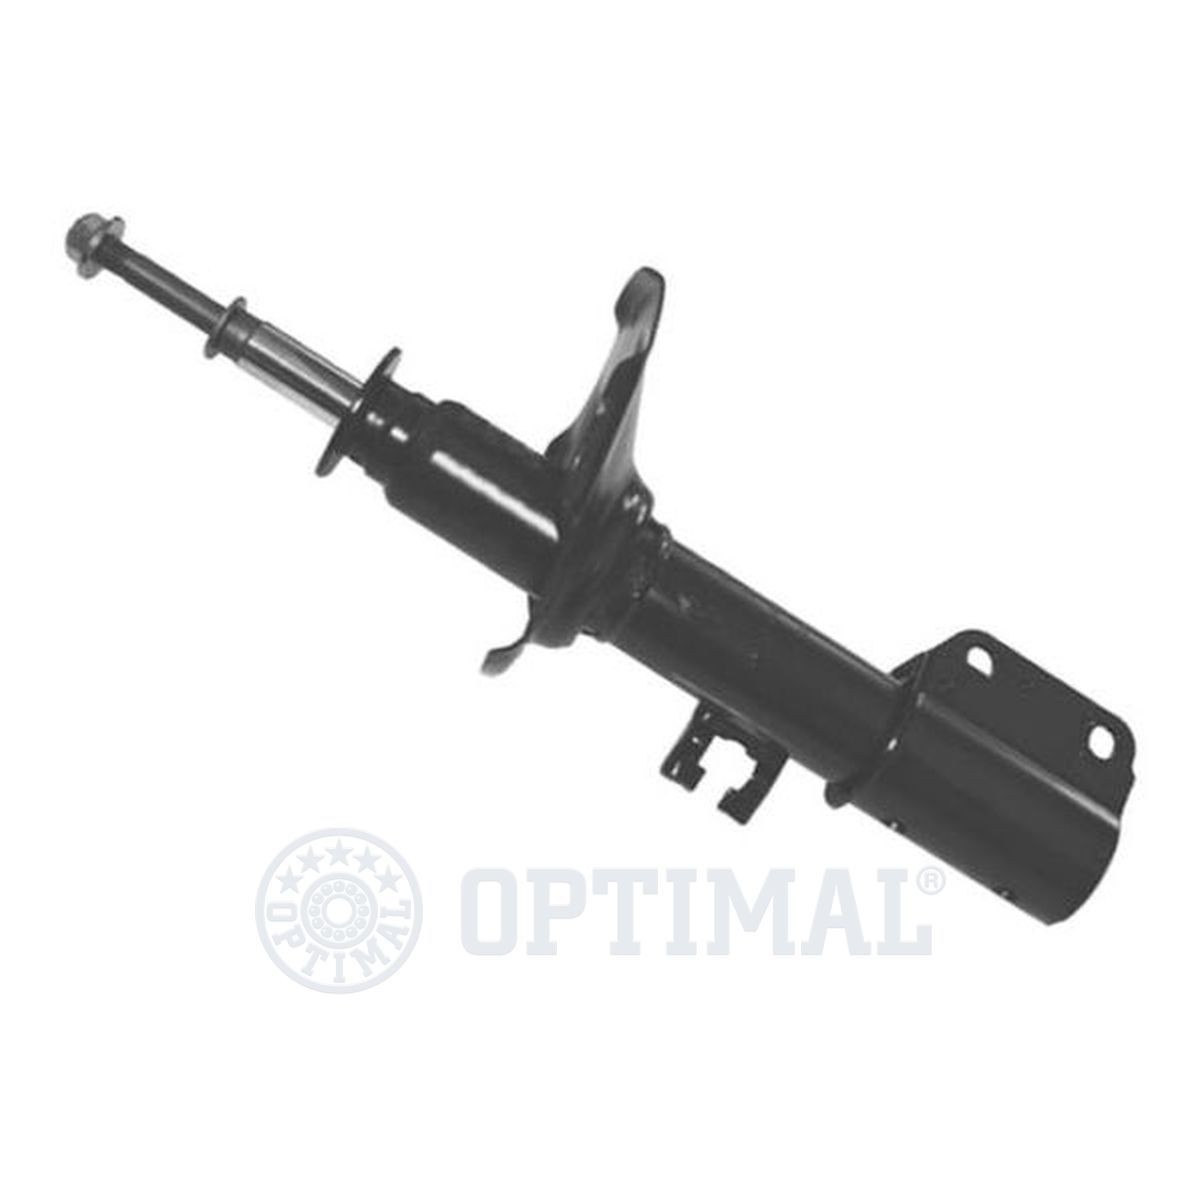 OPTIMAL A-3066HR Shock absorber Front Axle Right, Oil Pressure, Twin-Tube, Suspension Strut, Top pin, Bottom Clamp, M12x1,25